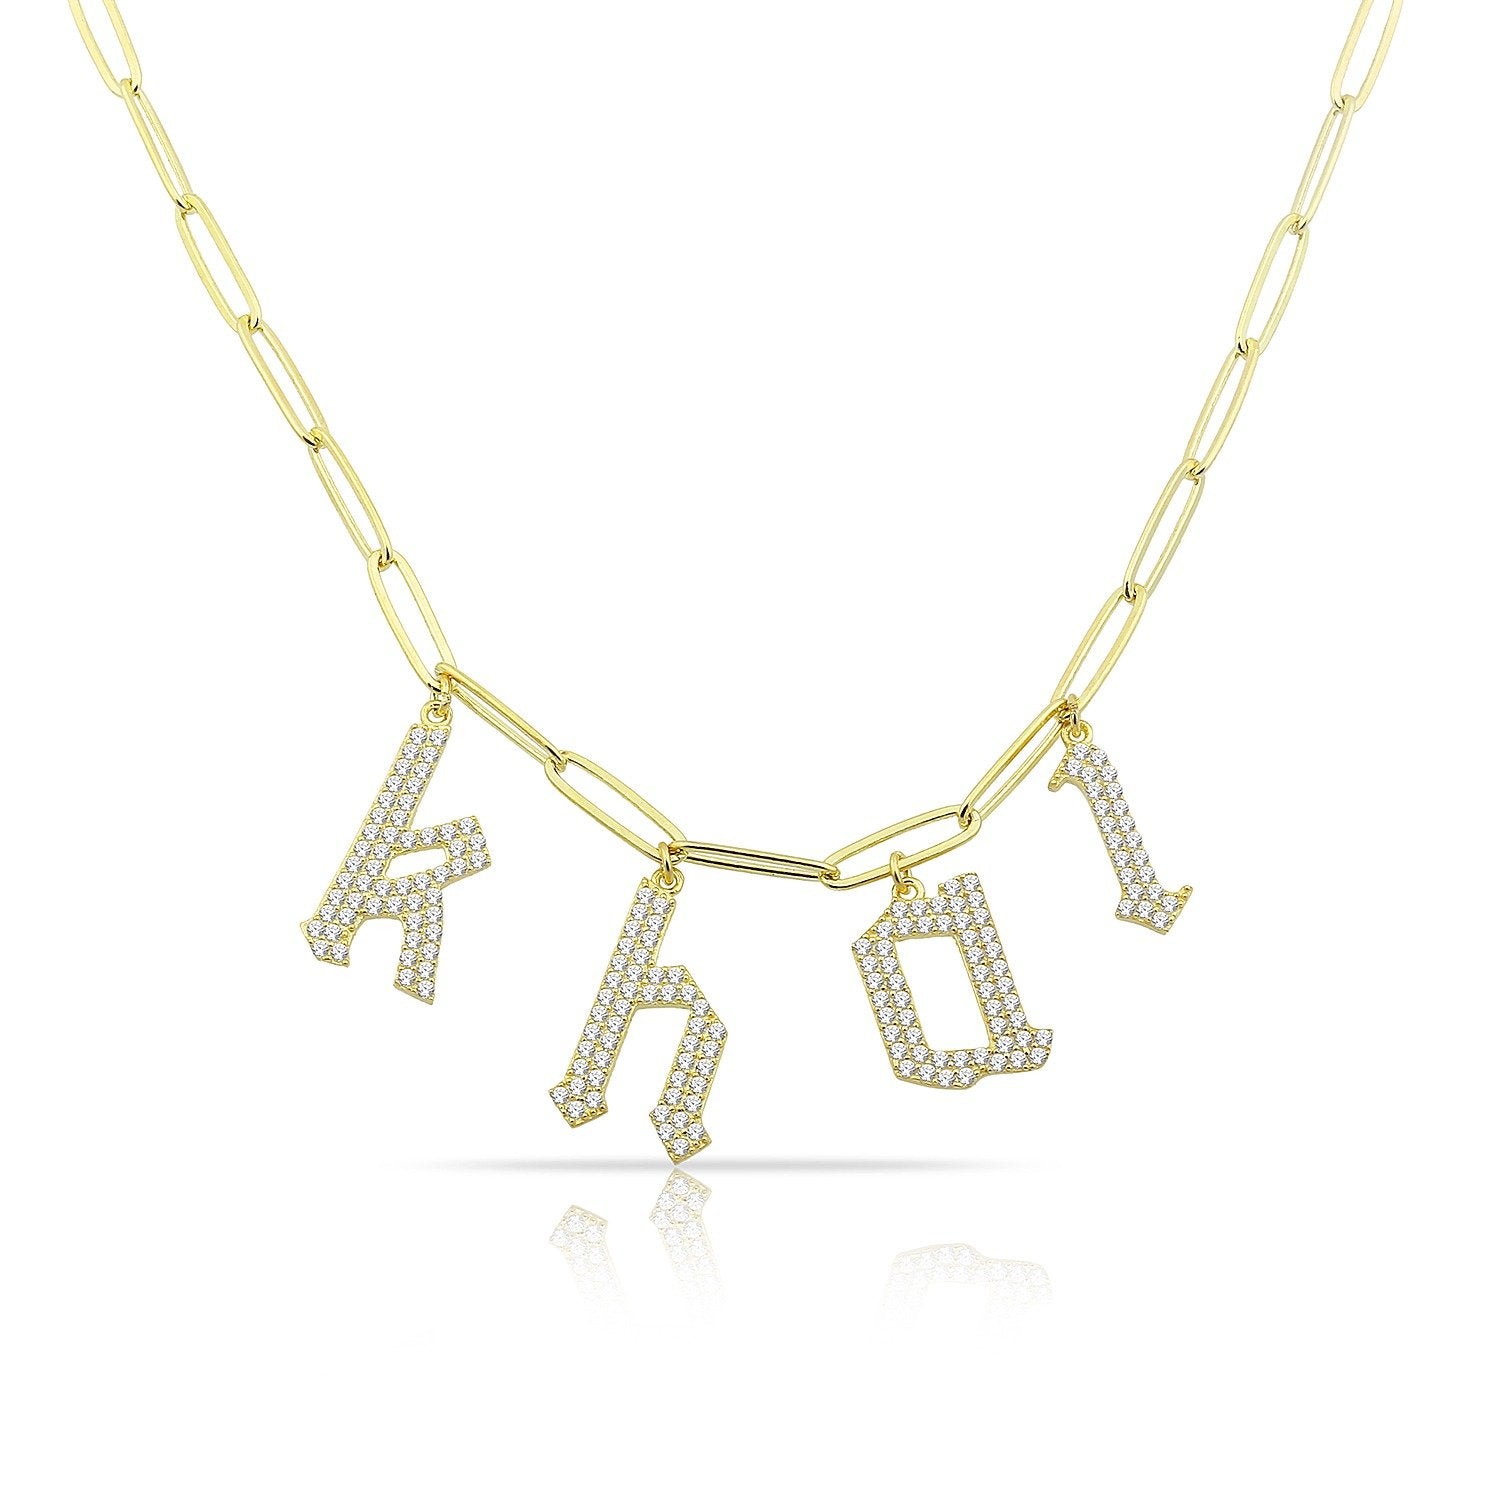 Custom Crystal Letters on a Chain Link Necklace